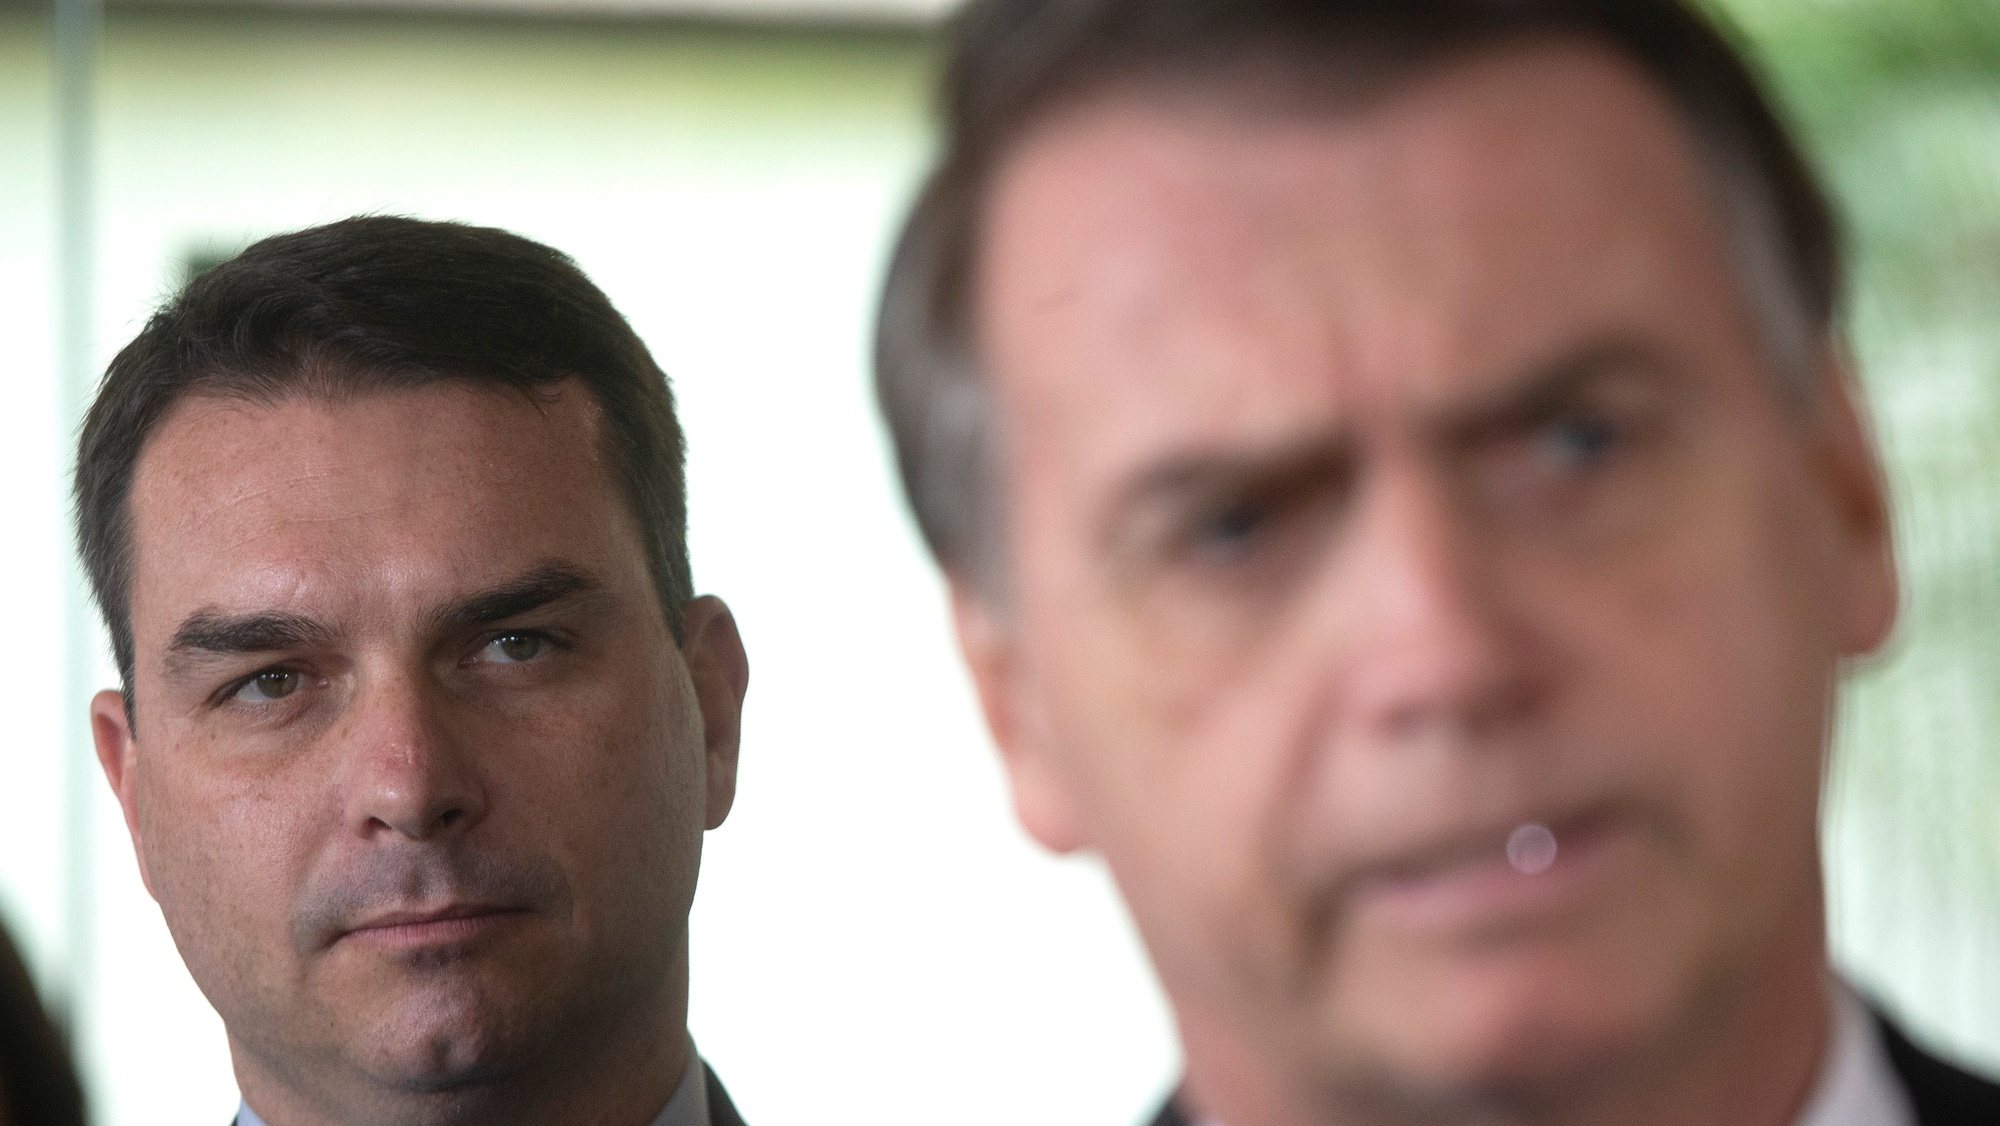 epa08628612 (FILE) - Then Brazilian President-elect Jair Bolsonaro (R) and his son, then elected senator Flavio Bolsonaro (L), arrive at the Supreme Court of Justice for a press conference in Brasilia, Brazil, 07 November 2018 (reissued 27 August 2020). According to the senator&#039;s office statement, the eldest son of Brazilian President Jair Bolsonaro, Senator Flavio Bolsonaro, said he has tested positive for the new coronavirus.  EPA/Joedson Alves *** Local Caption *** 54757503